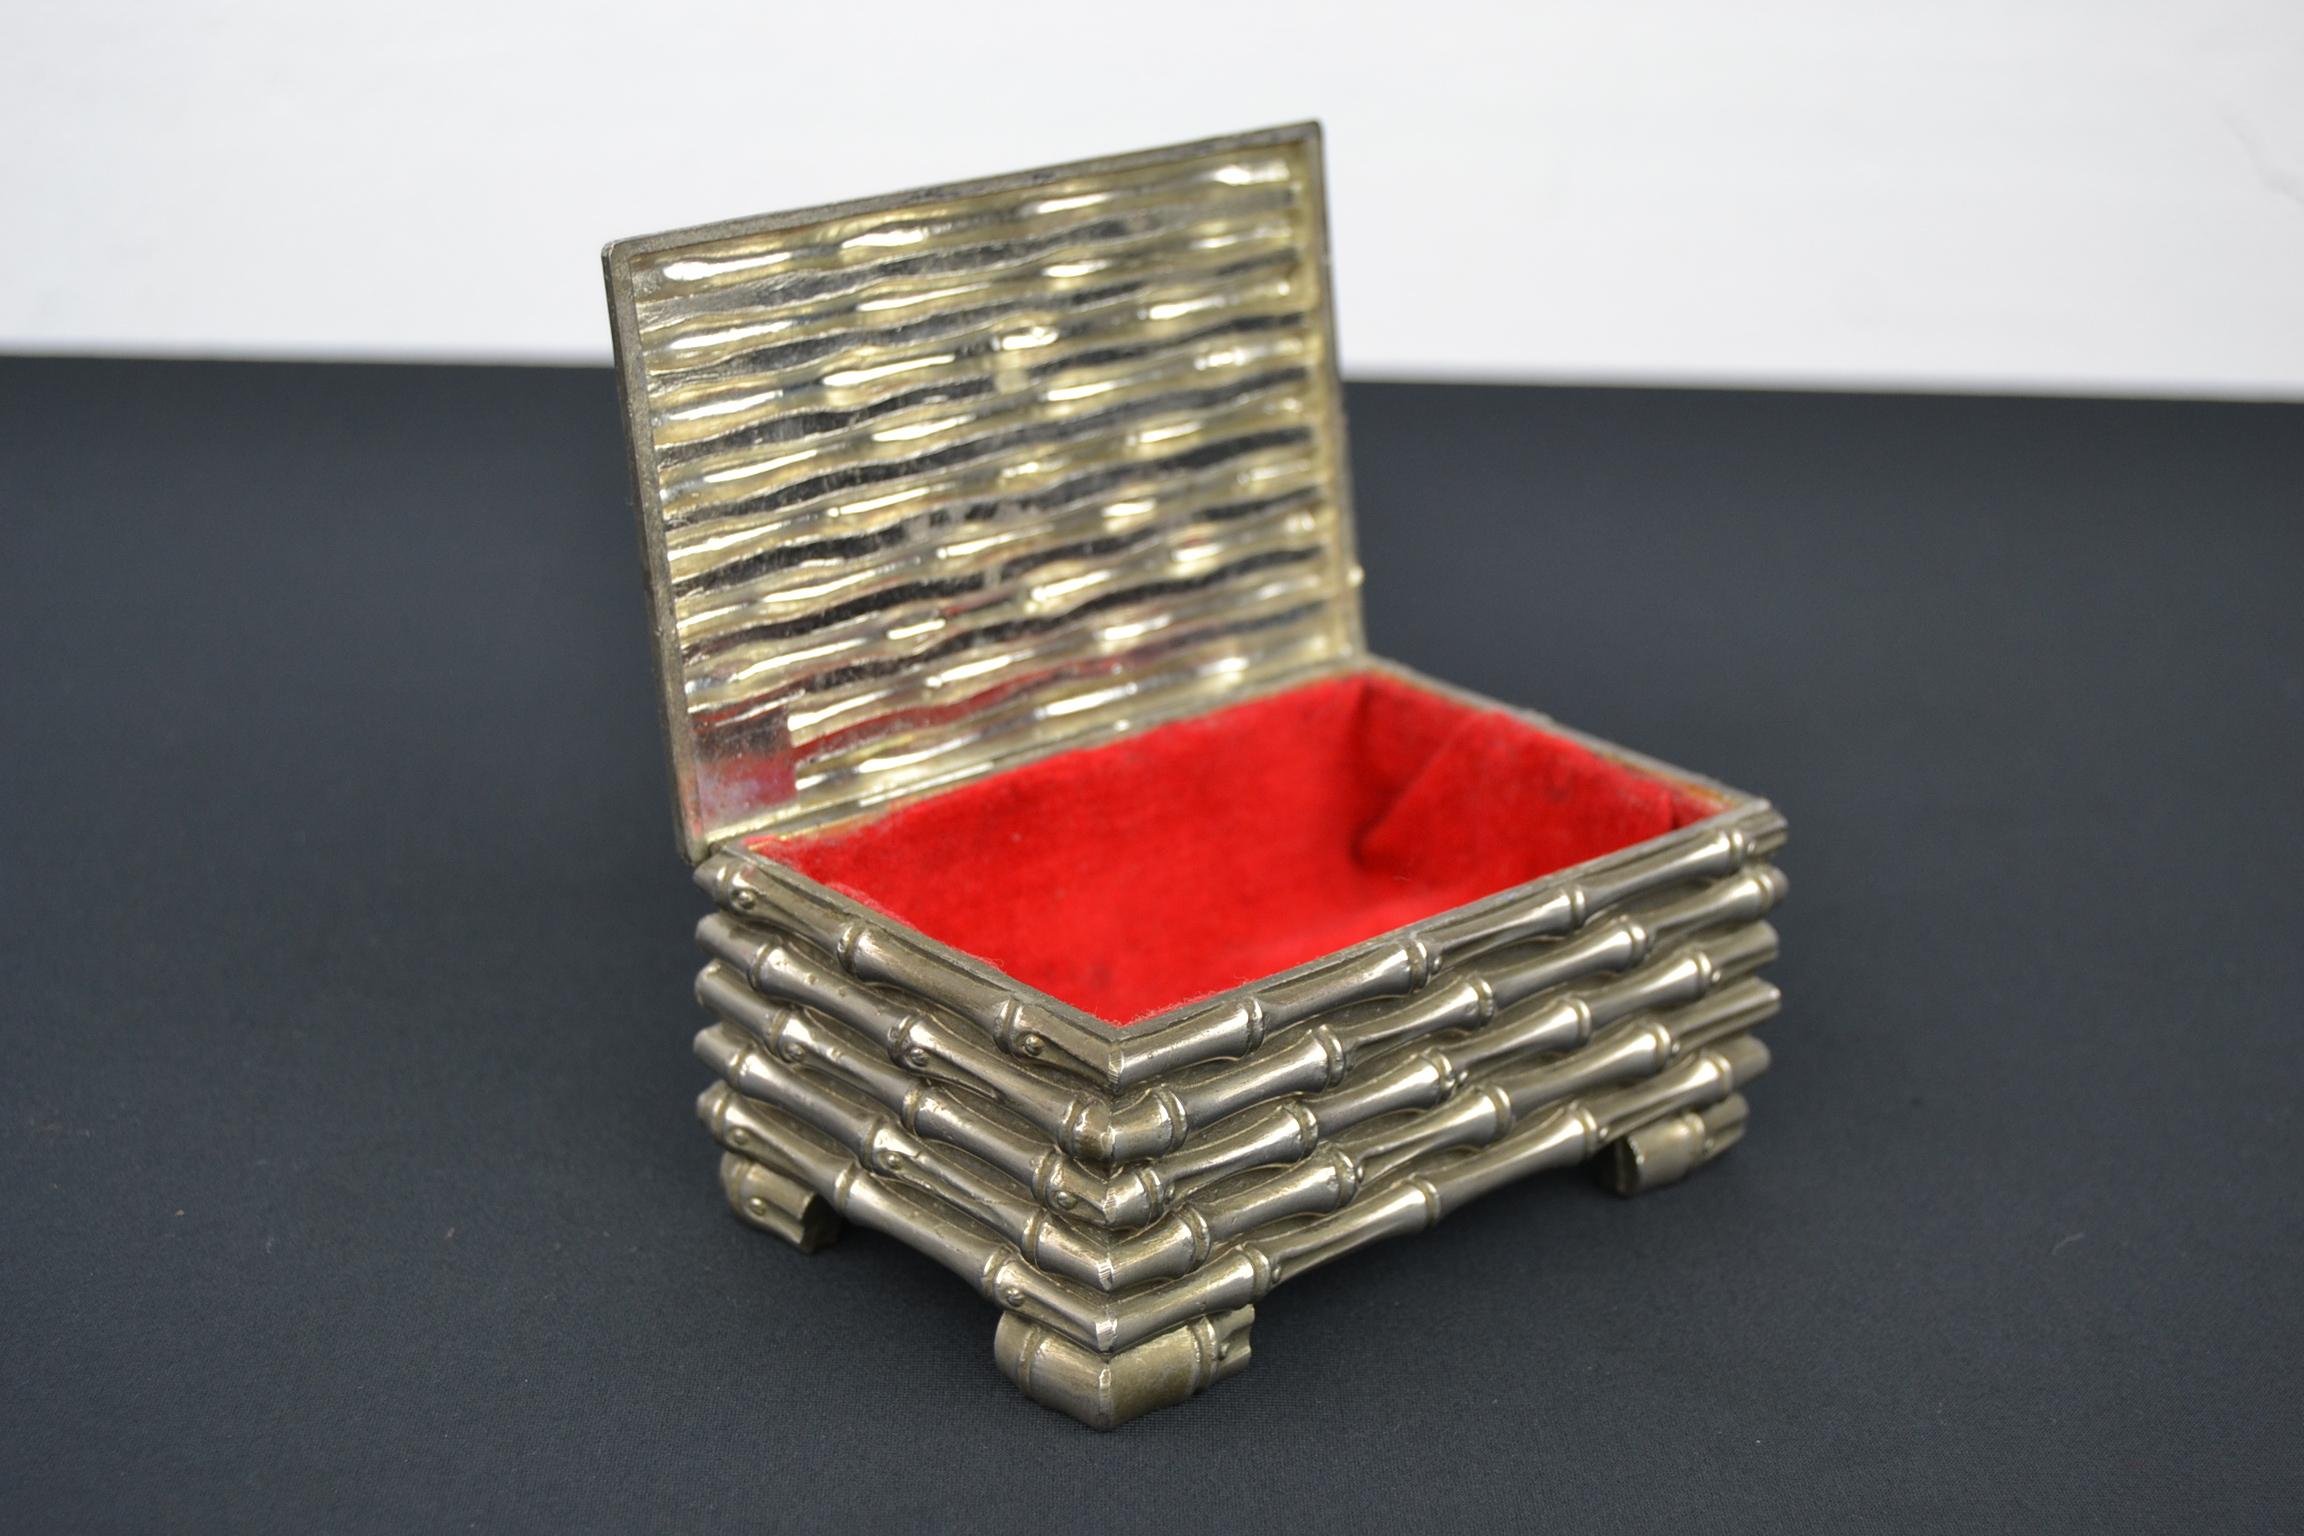 Silver plated faux bamboo box by Maison Baguès.
A stylish French little jewelry box, trinket box or storage box
in metal faux bamboo with red velvet inside. Embossed bamboo sticks on top of the lid and all around.
A silver plated footed casket